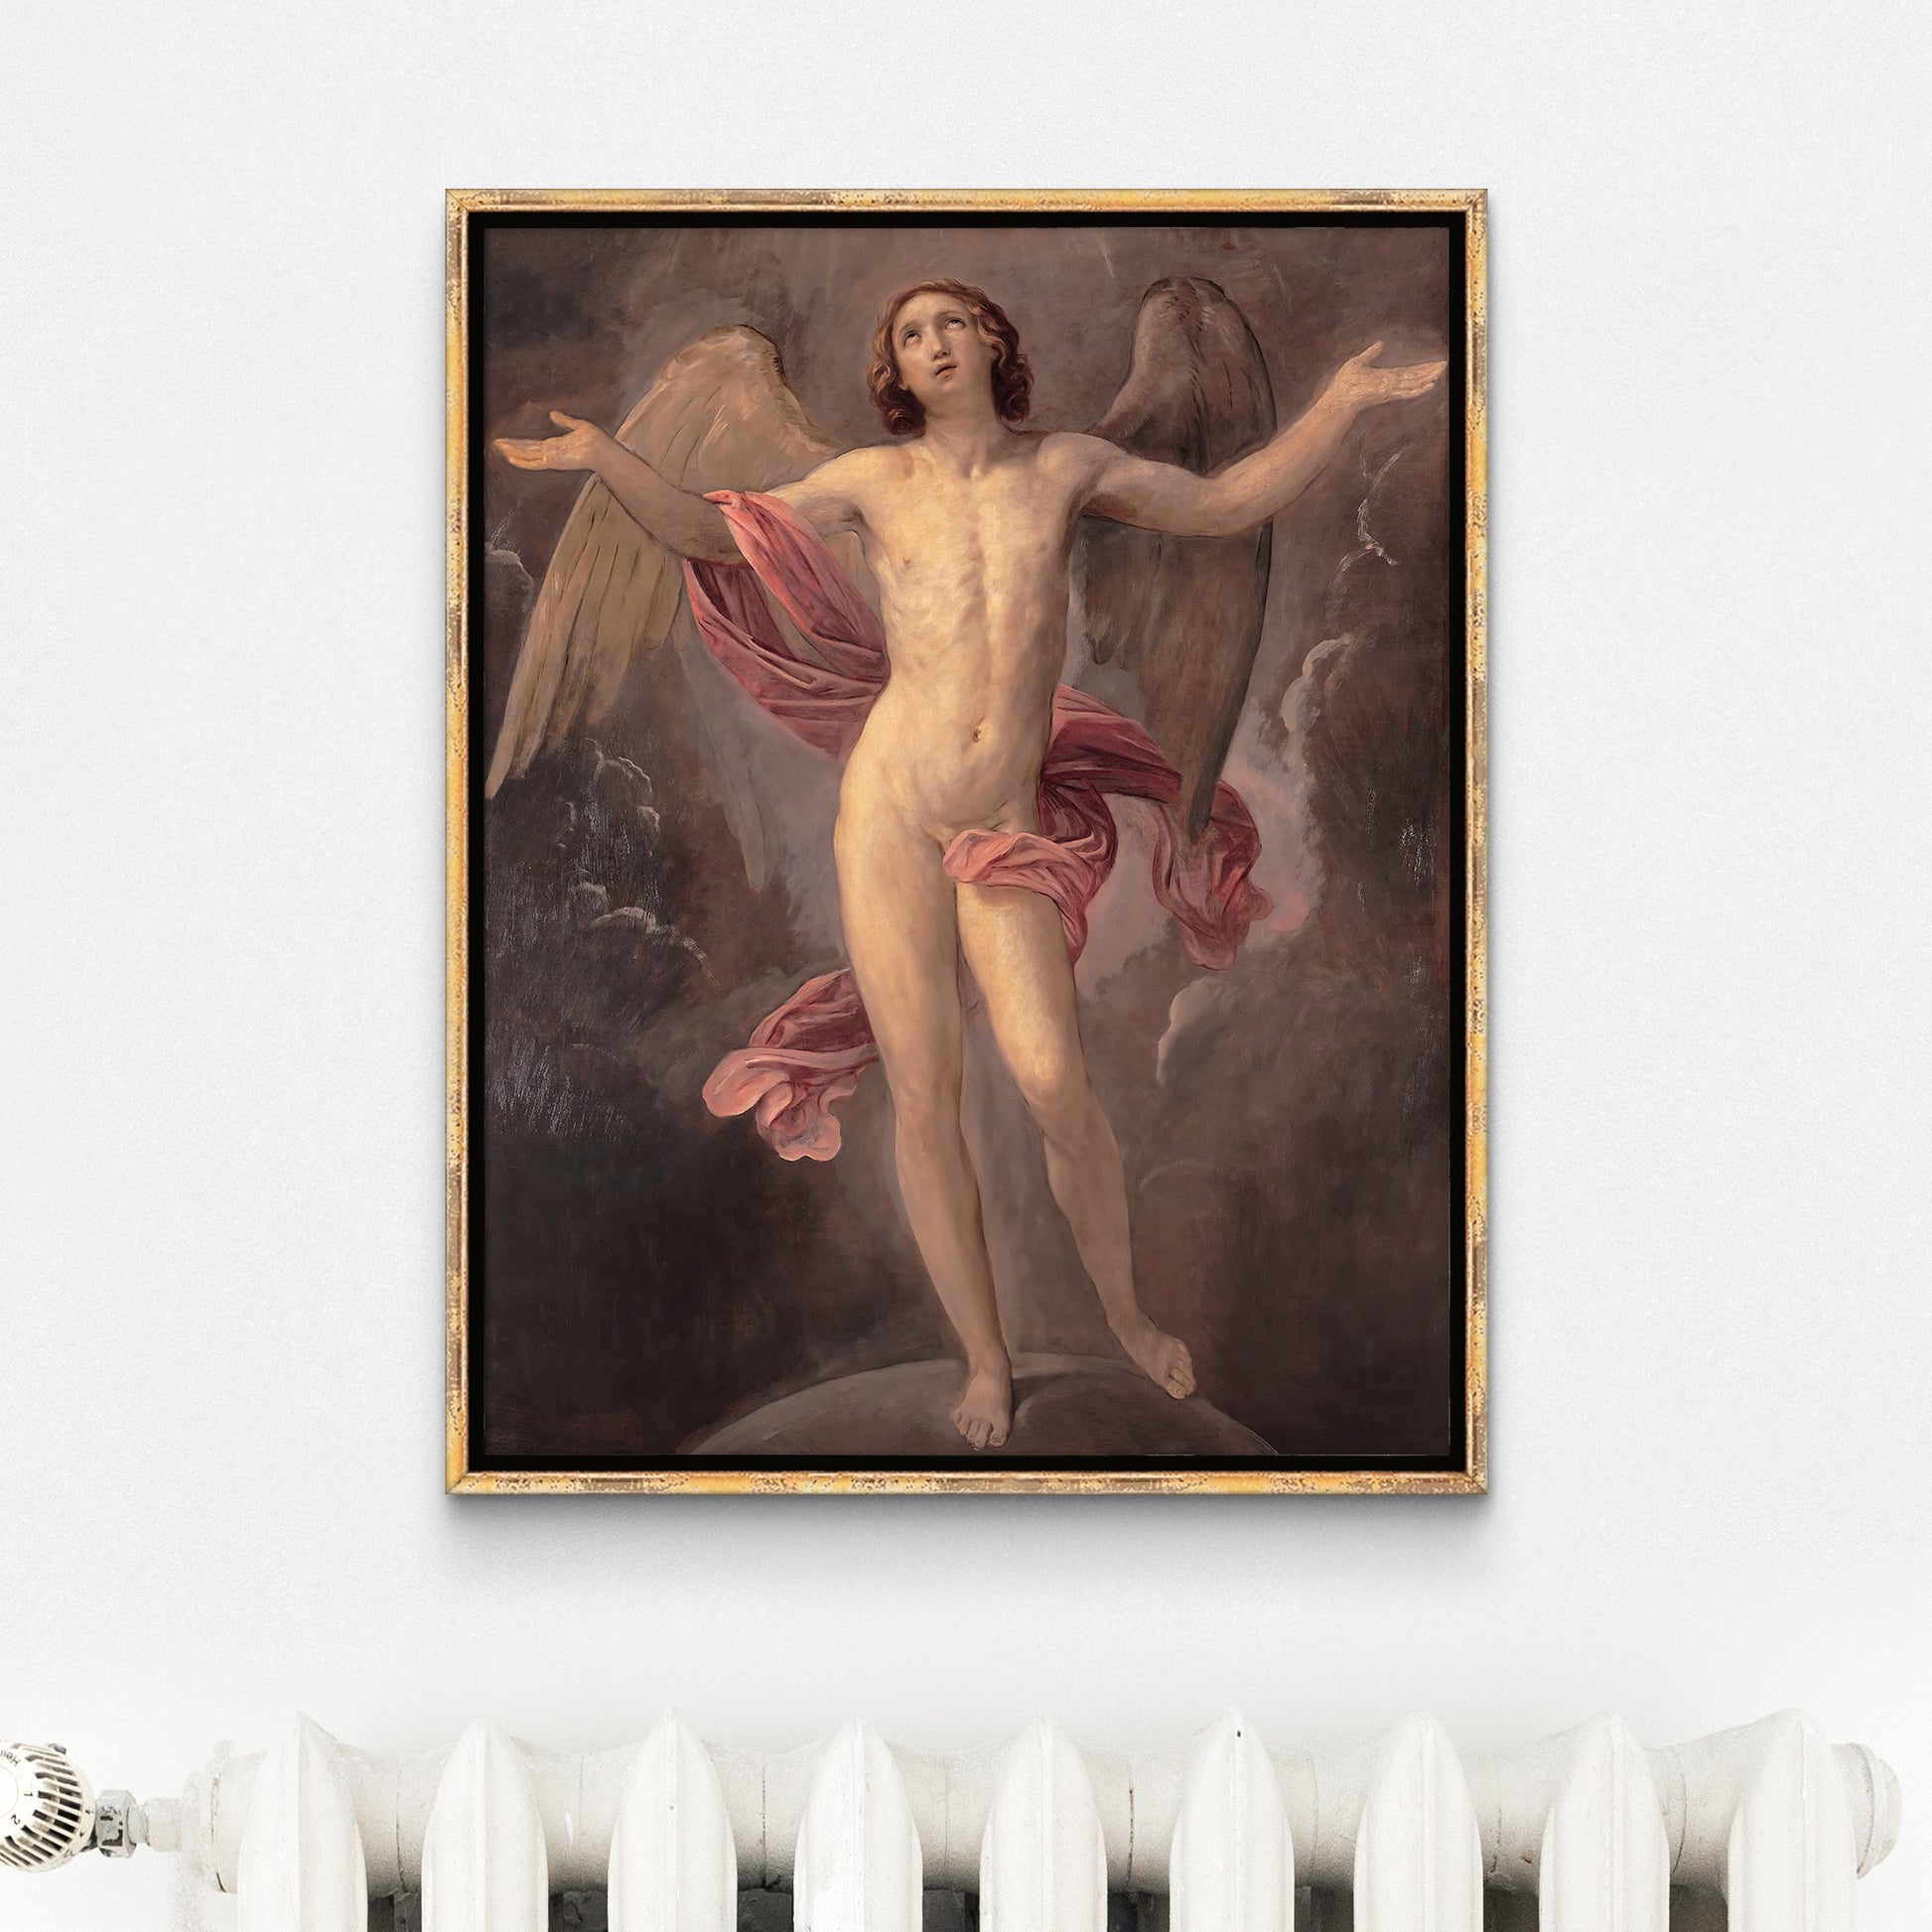 Be inspired by our classic art print Blessed Soul by Guido Reni. This artwork was printed using the giclée process on archival acid-free paper and is presented in an antique golden frame that captures its timeless beauty in every detail.